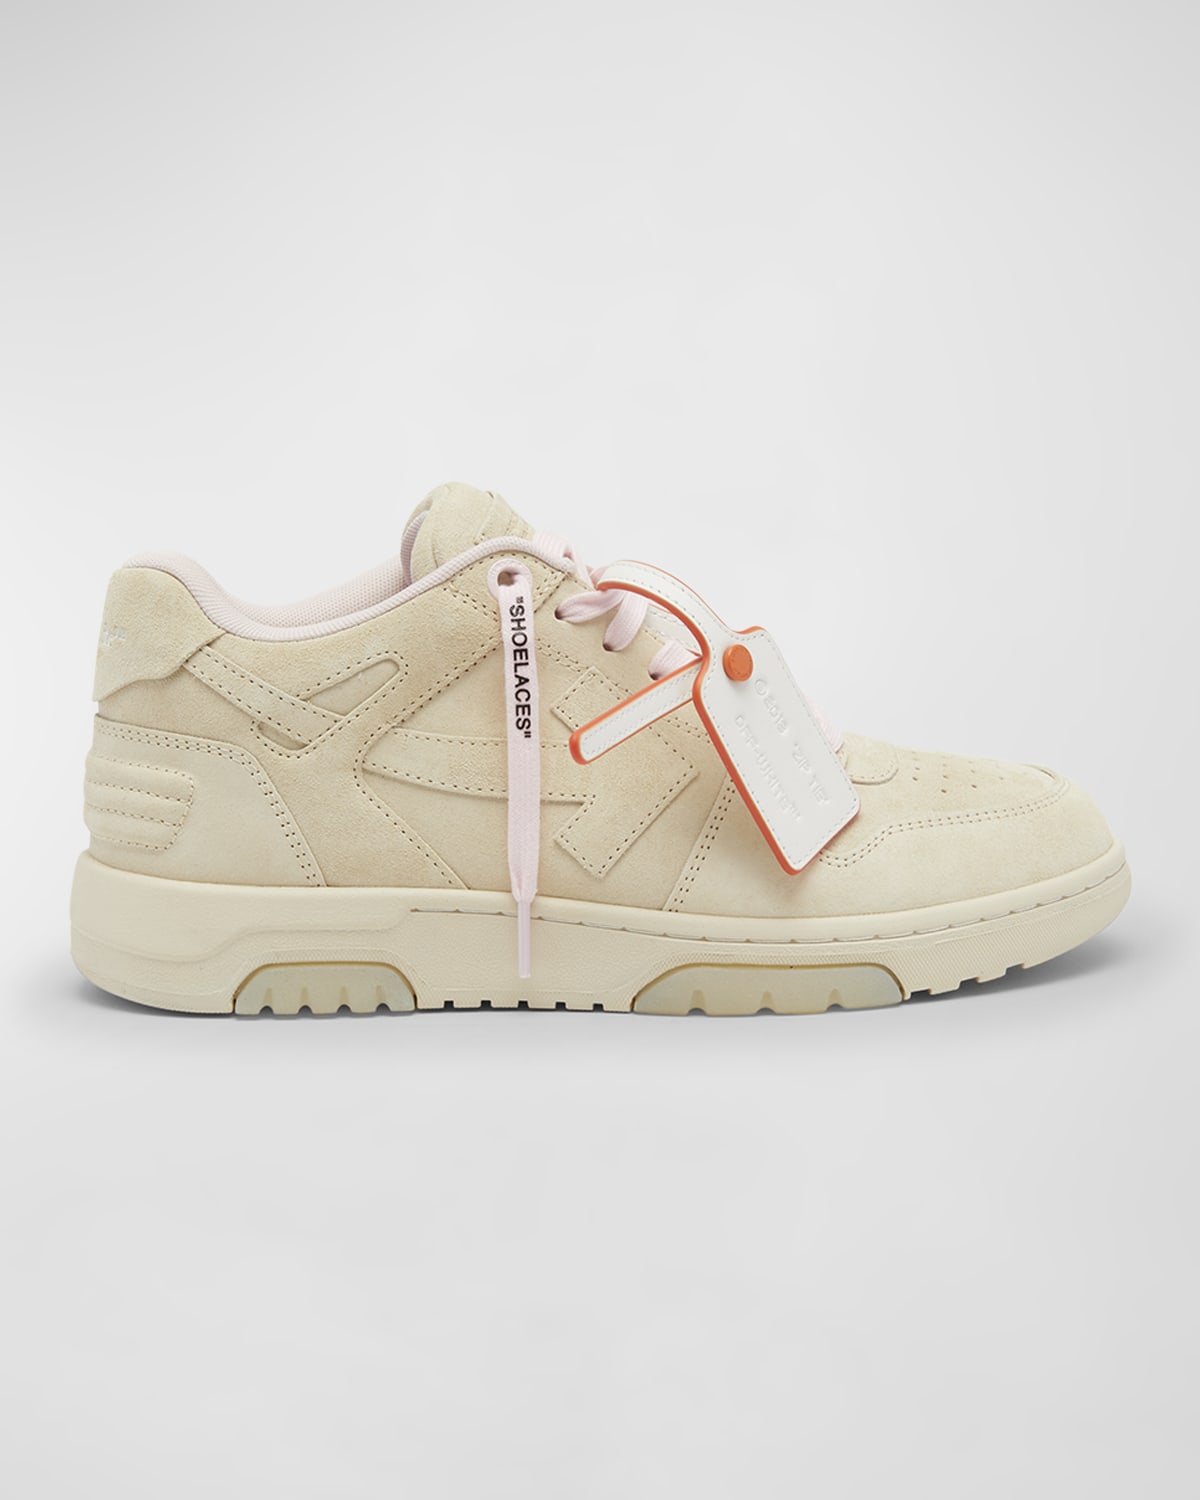 Off-White Out Of Office Bicolor Sneakers | Neiman Marcus